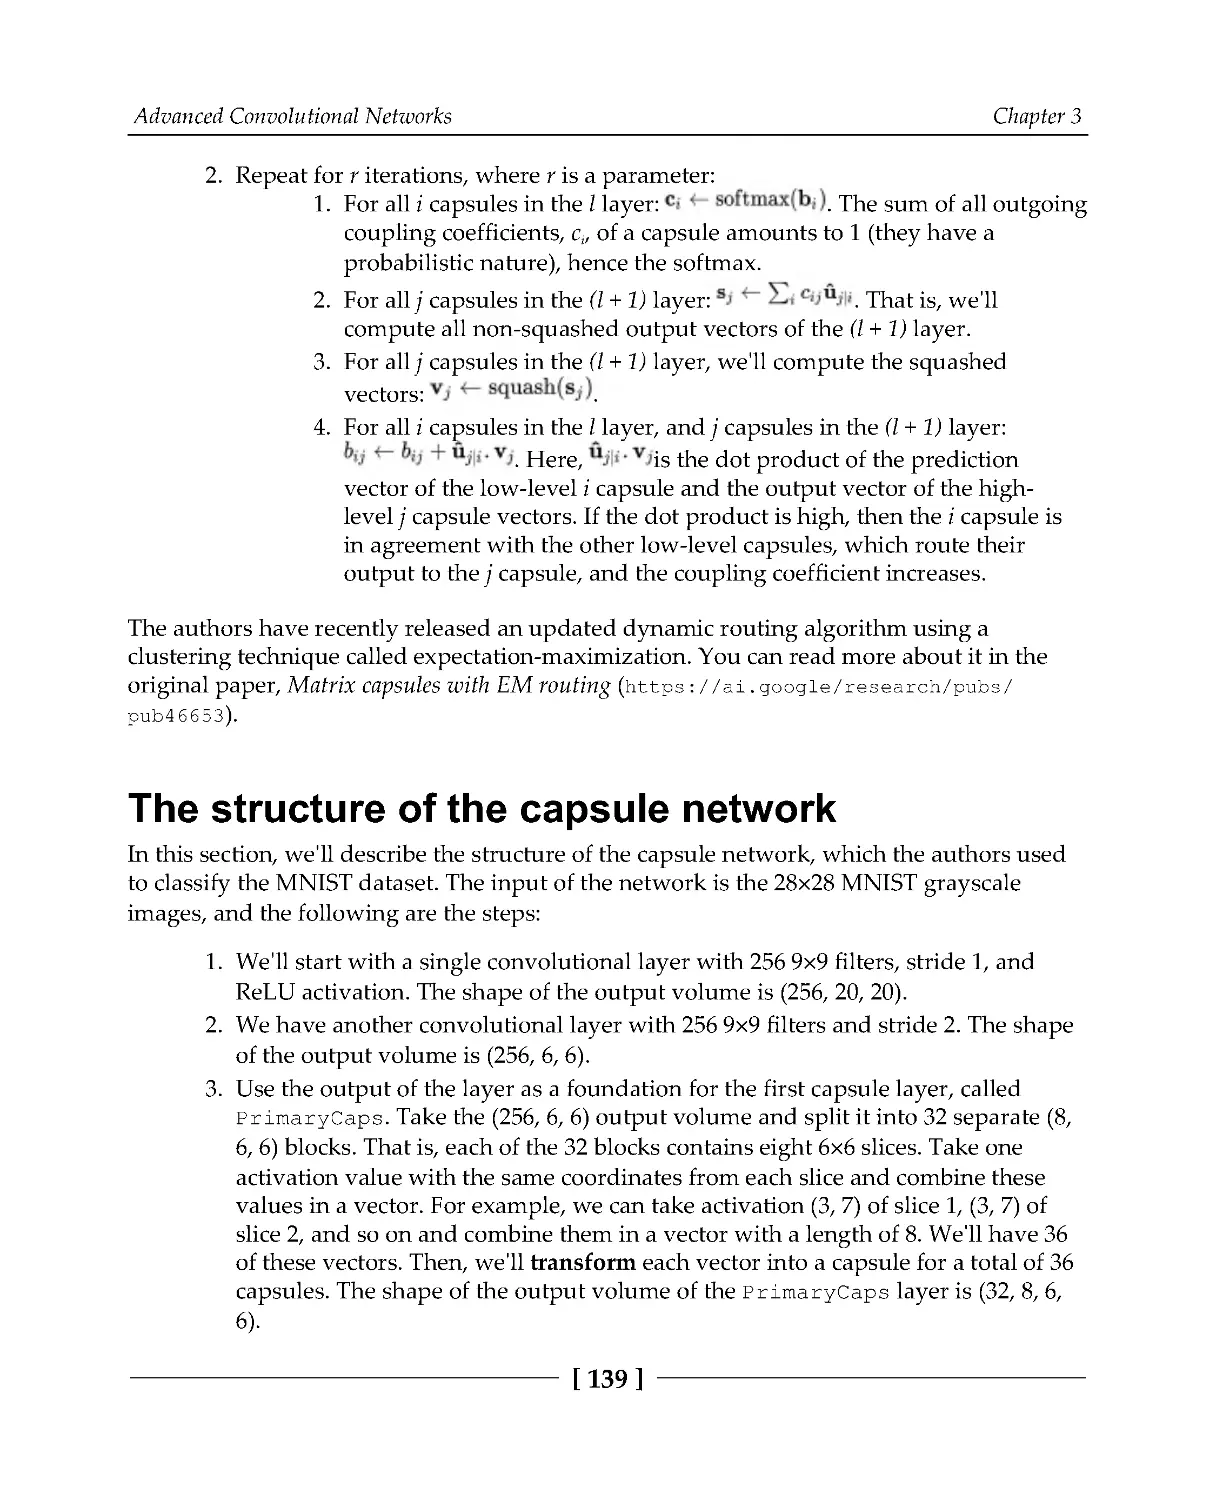 The structure of the capsule network